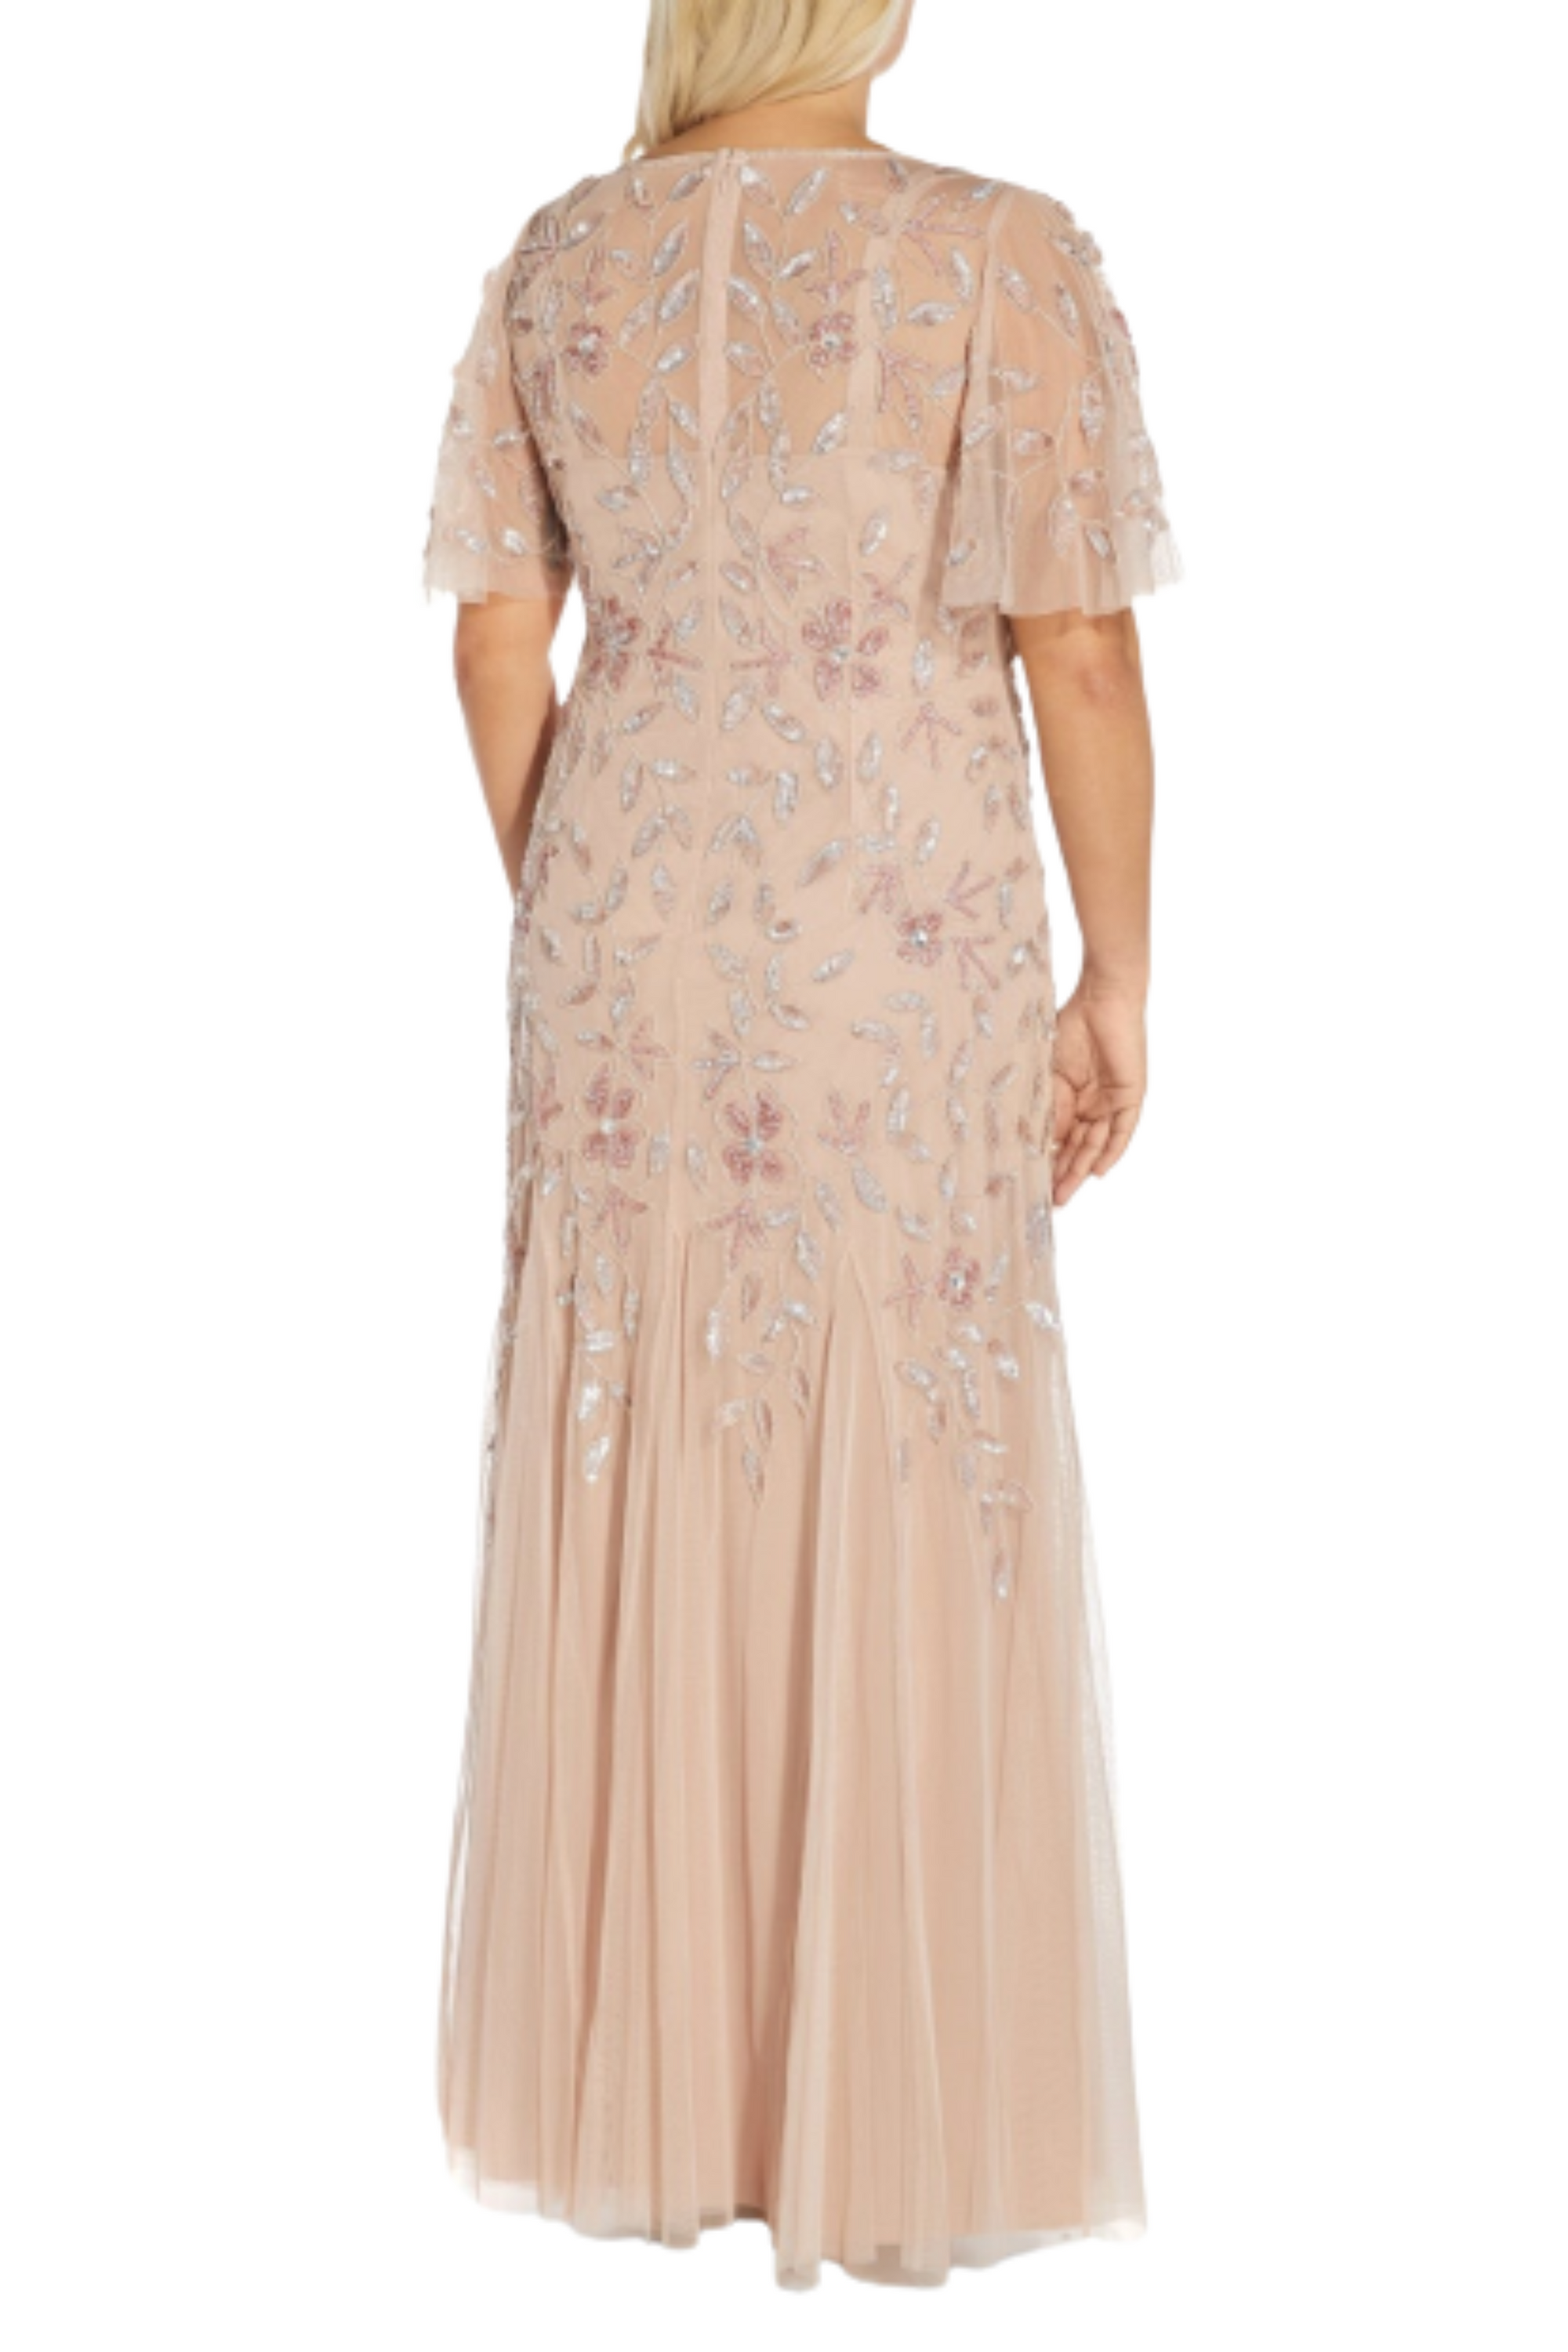 Adrianna Papell Floral Beaded Gown - Blush